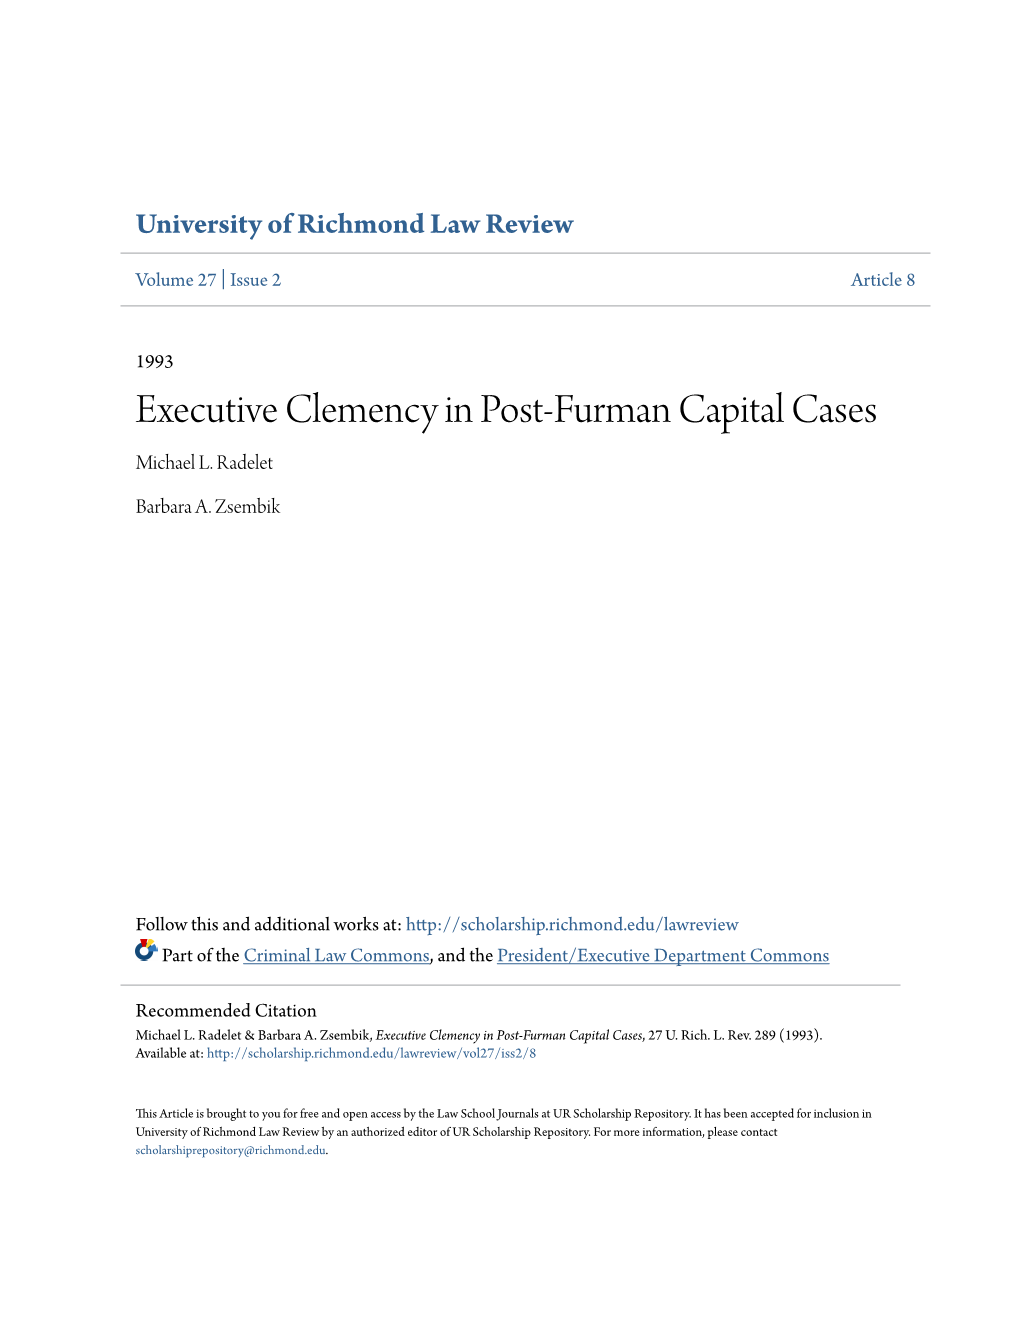 Executive Clemency in Post-Furman Capital Cases Michael L